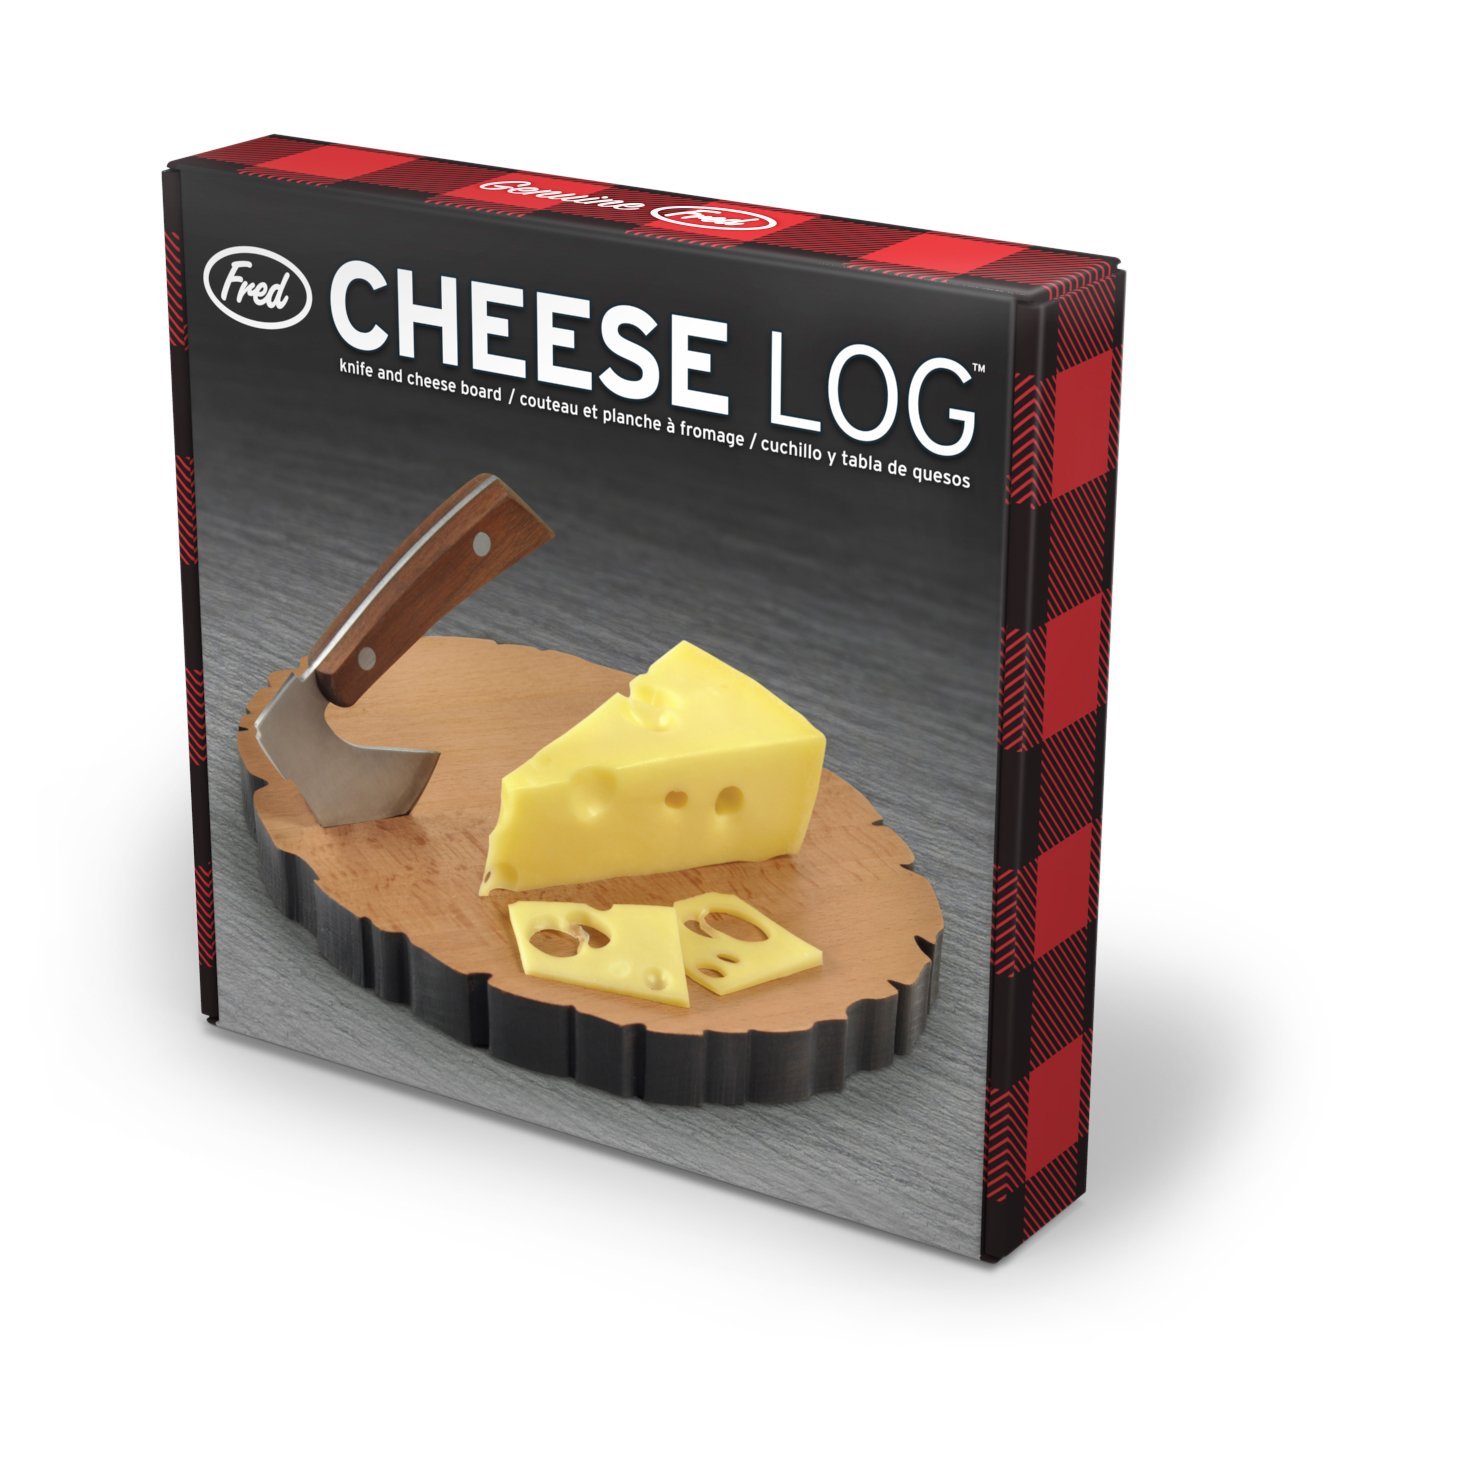 Amazon.com: Fred CHEESE LOG Board and Knife Set: Kitchen & Dining